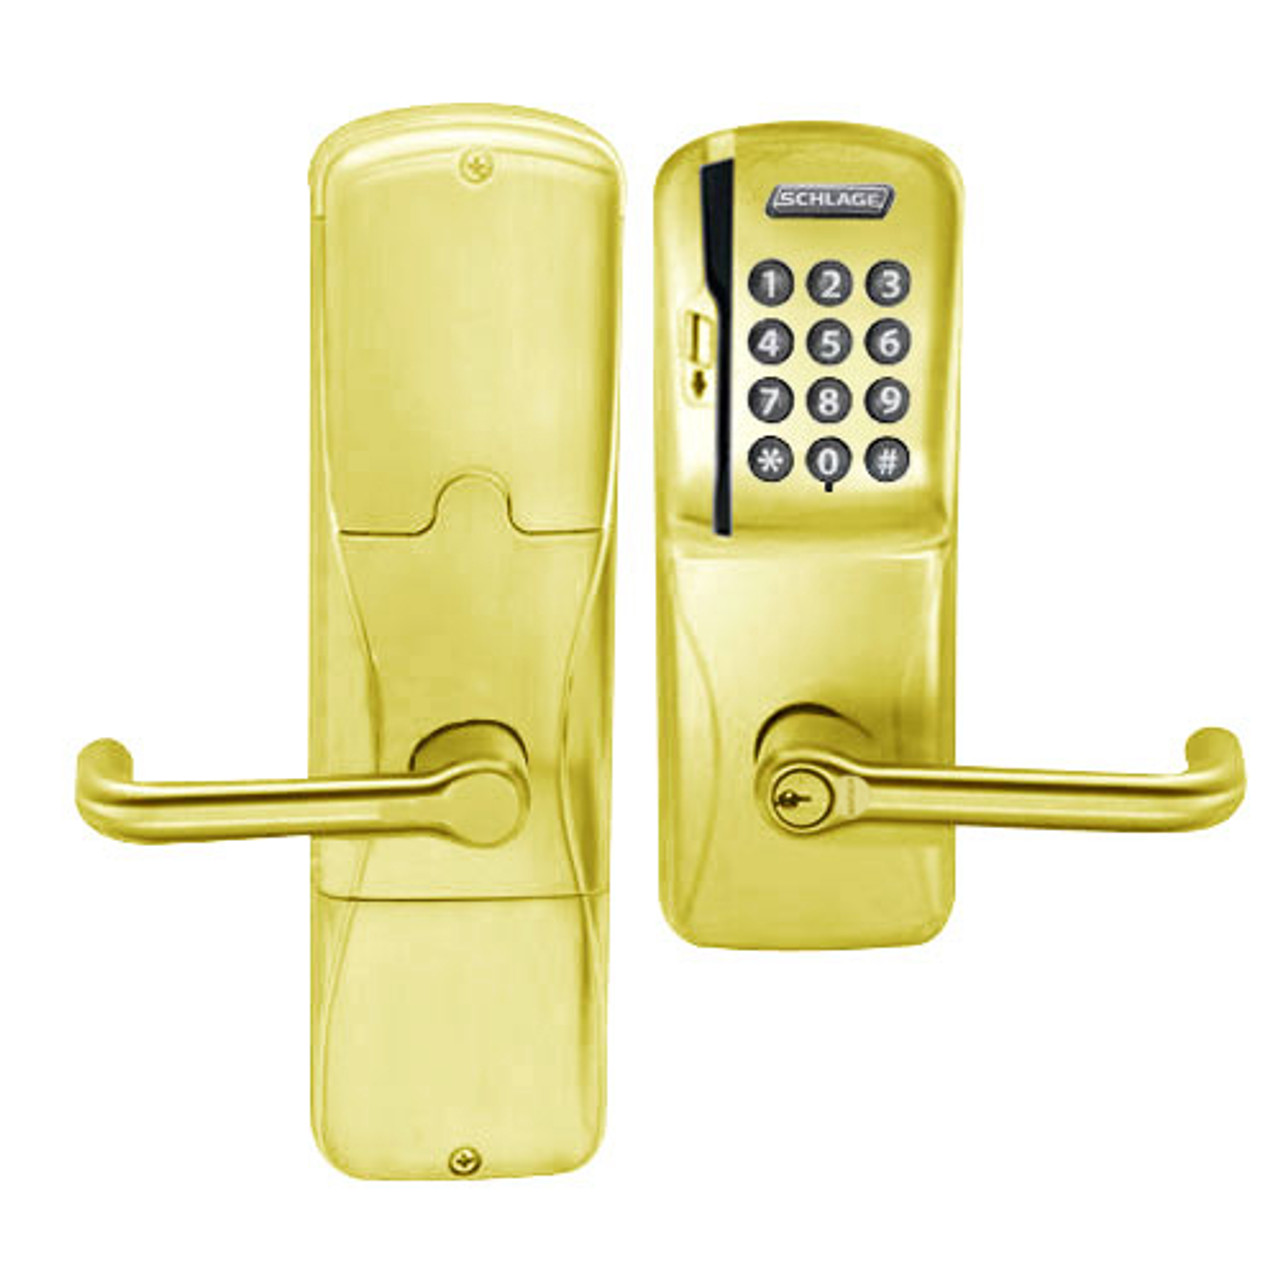 AD200-MD-40-MSK-TLR-GD-29R-605 Schlage Privacy Mortise Deadbolt Magnetic Stripe Keypad Lock with Tubular Lever in Bright Brass